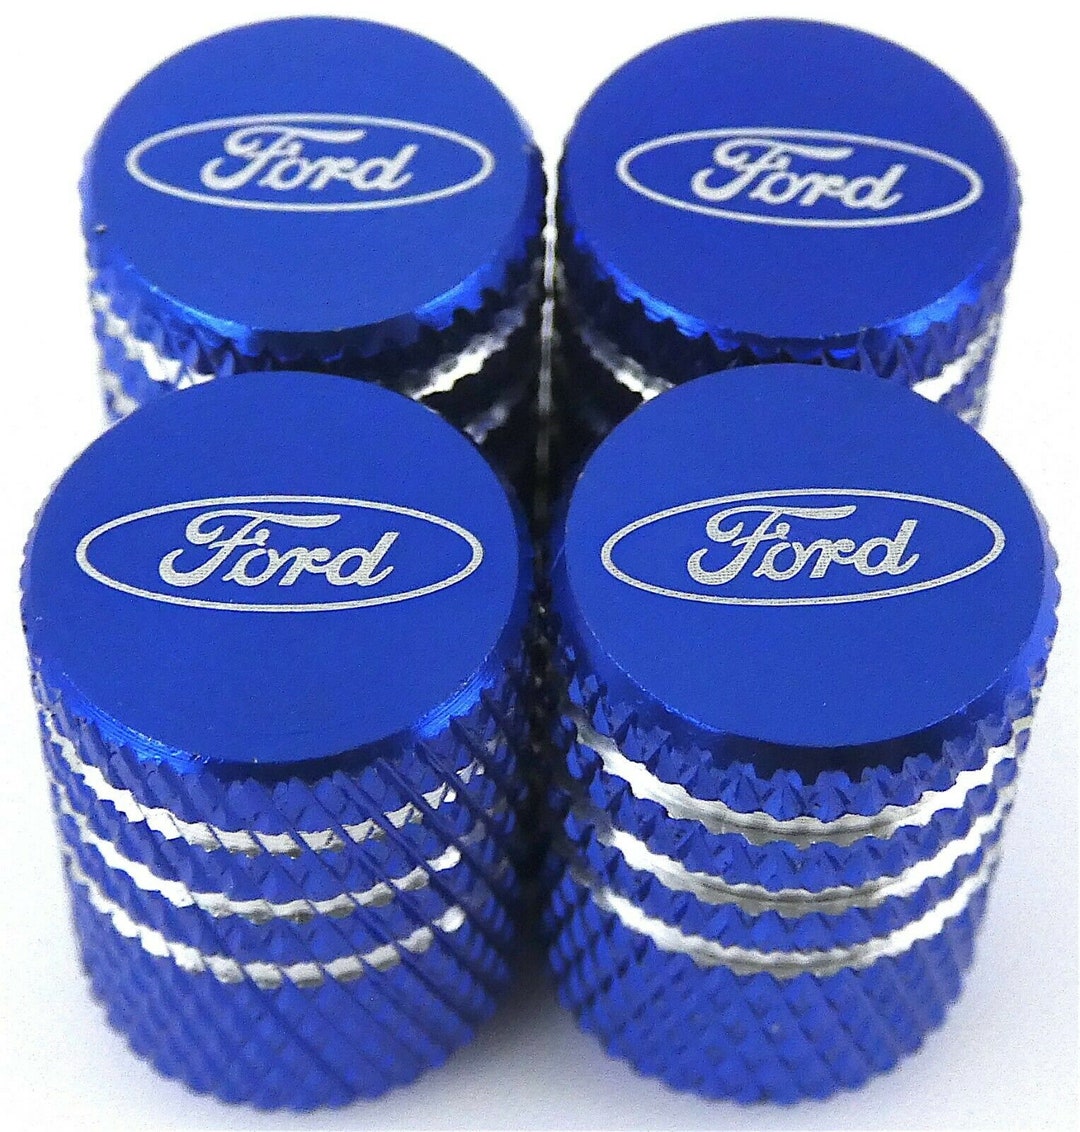 4x Ford Tire Valve Stem Caps for Car, Truck Universal Fitting